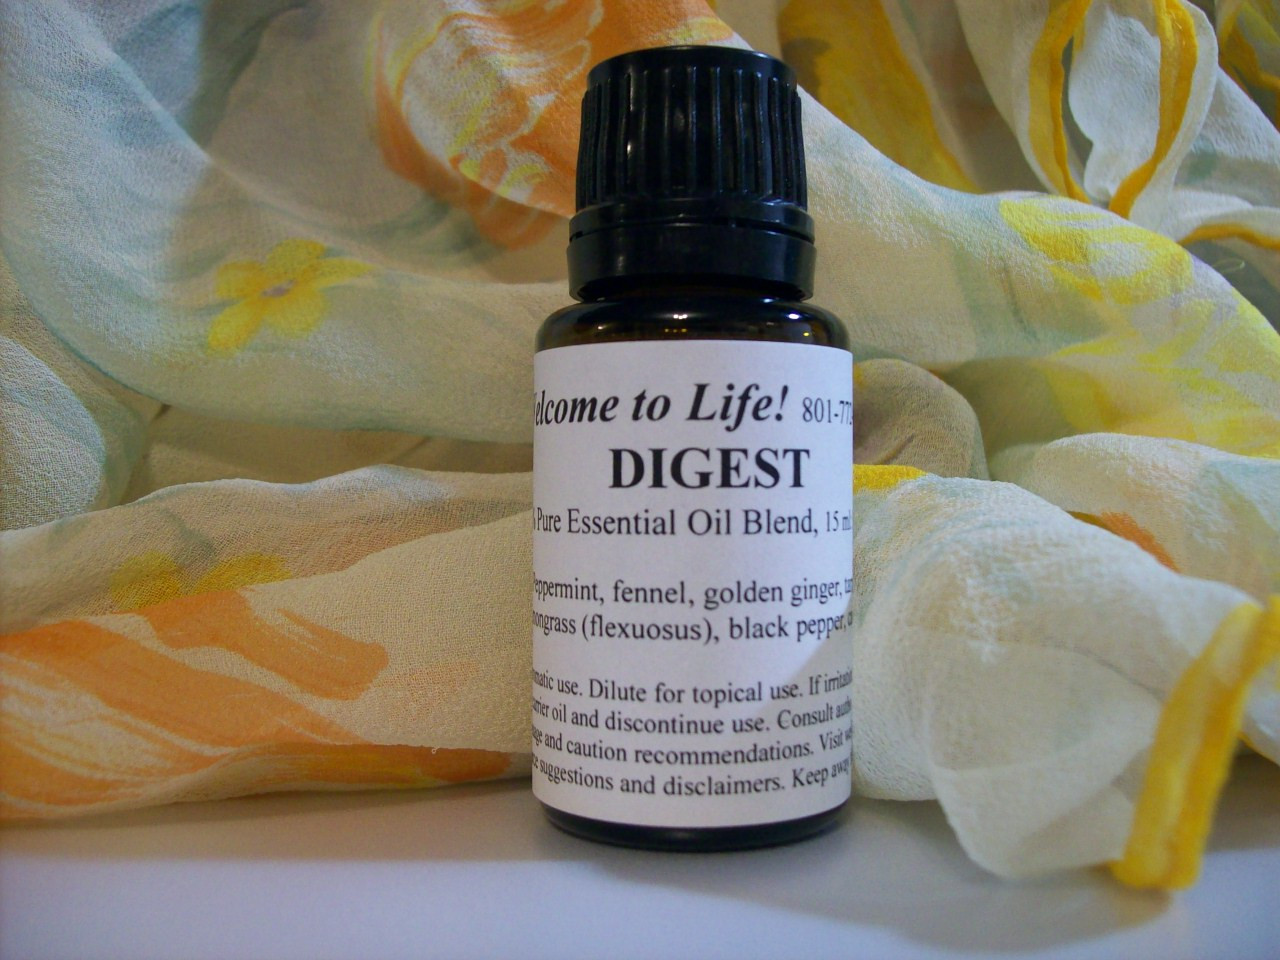 Digest Ease Essential Oil Blend, 100% Pure Essential Oils, 15 ml